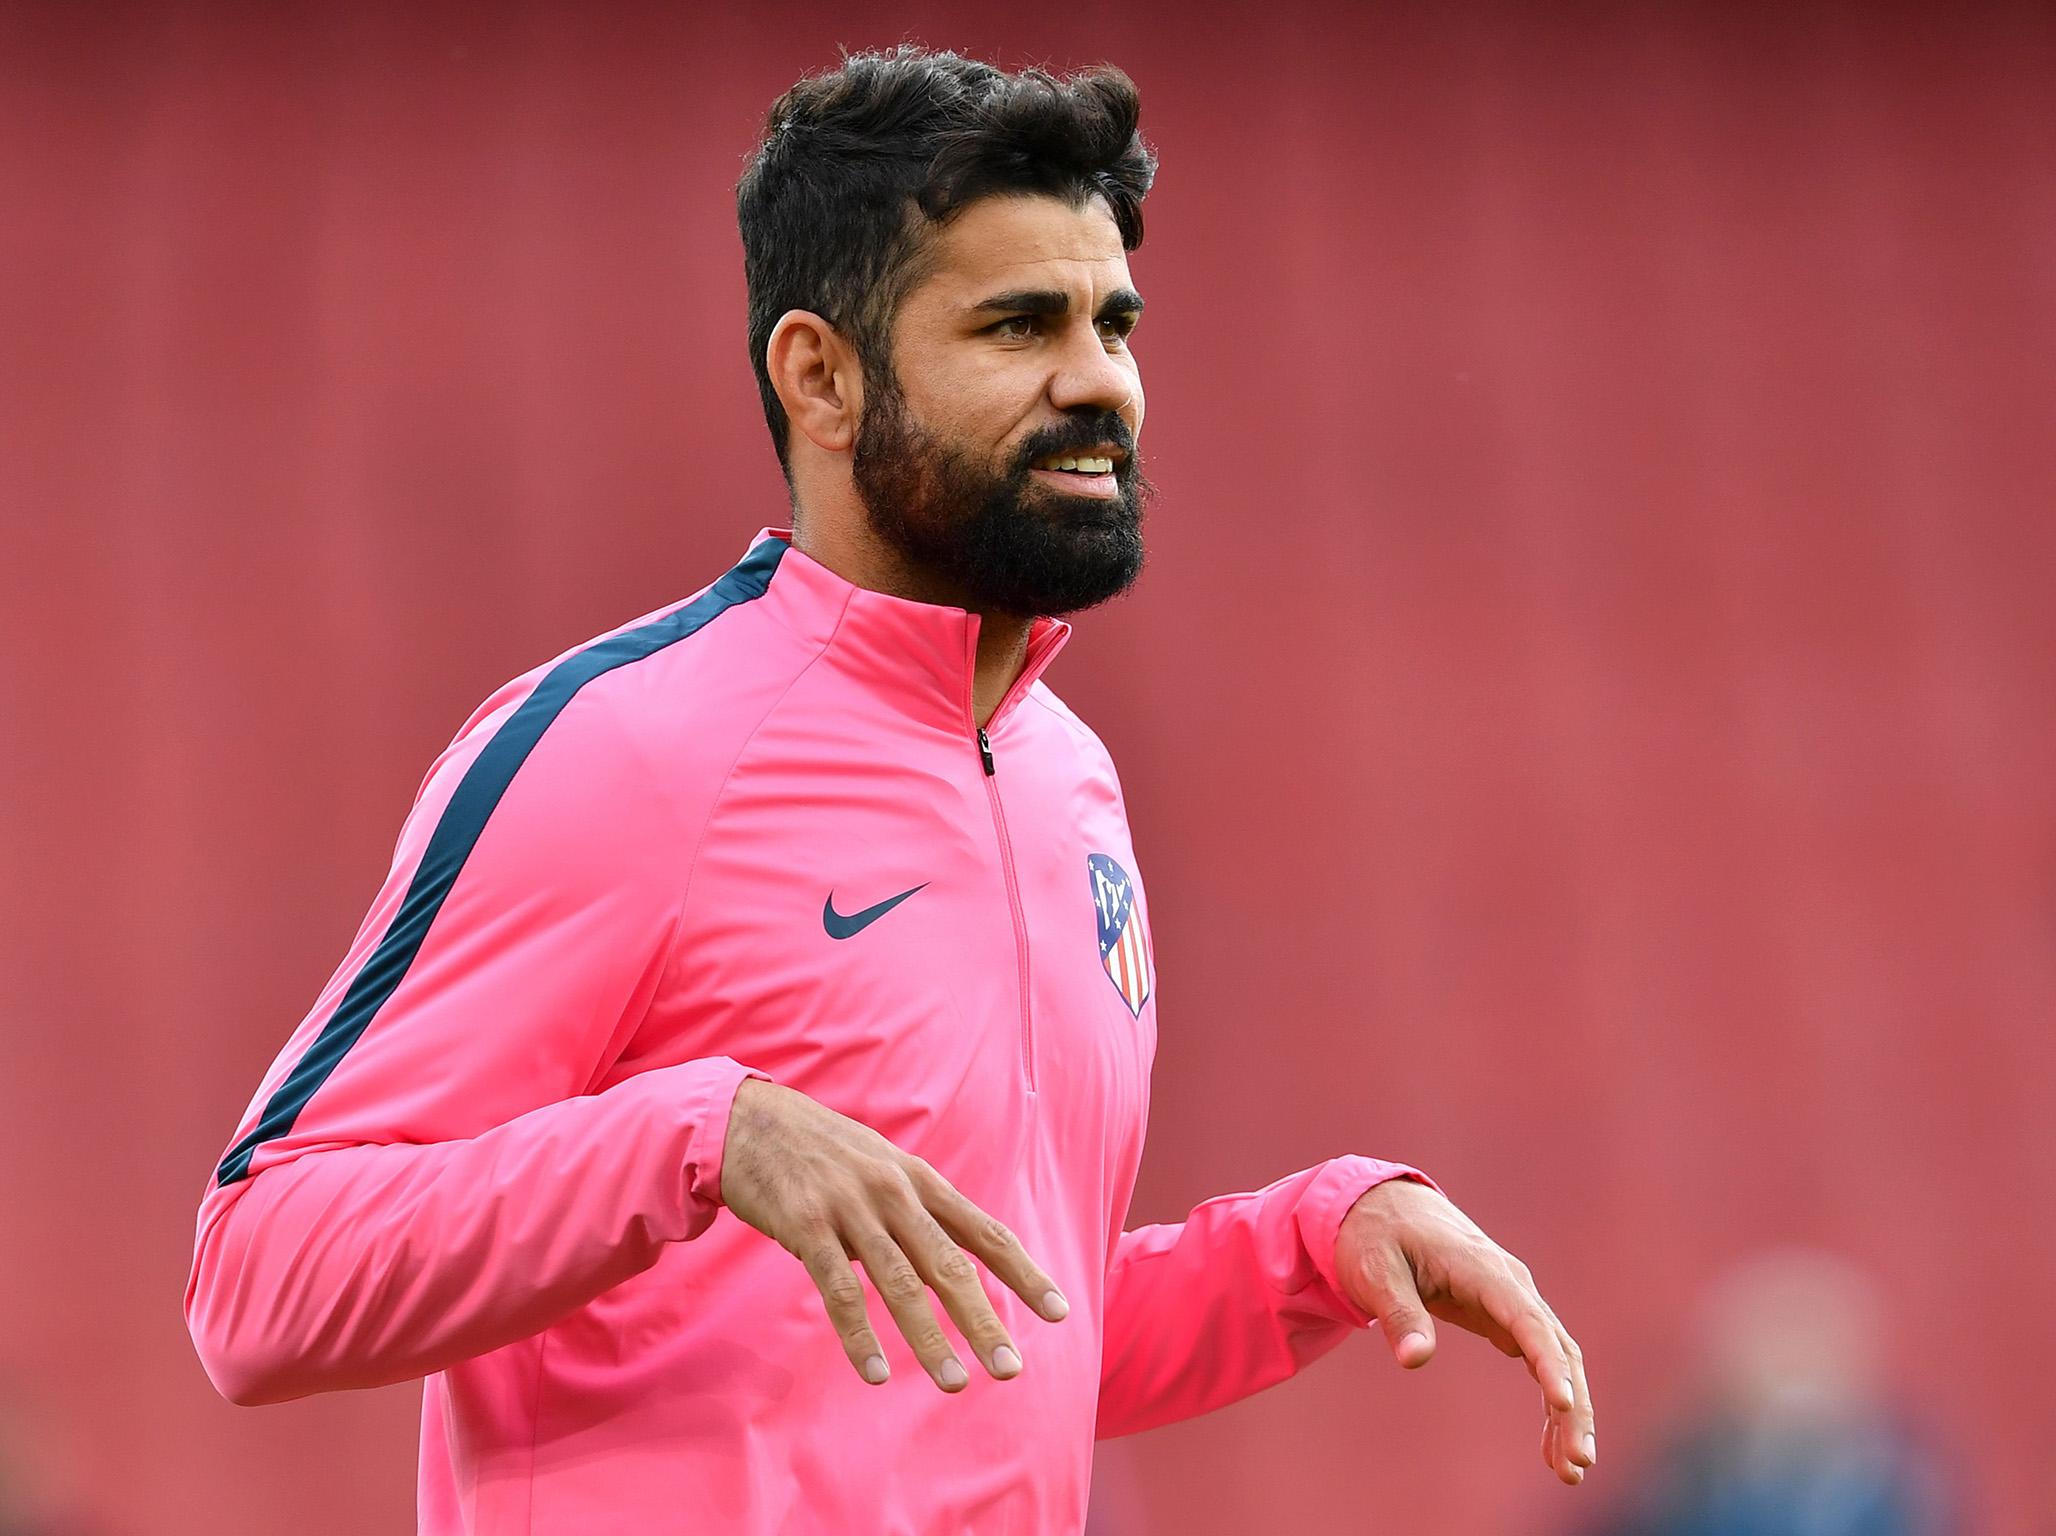 Costa has punished Arsenal many times in the past